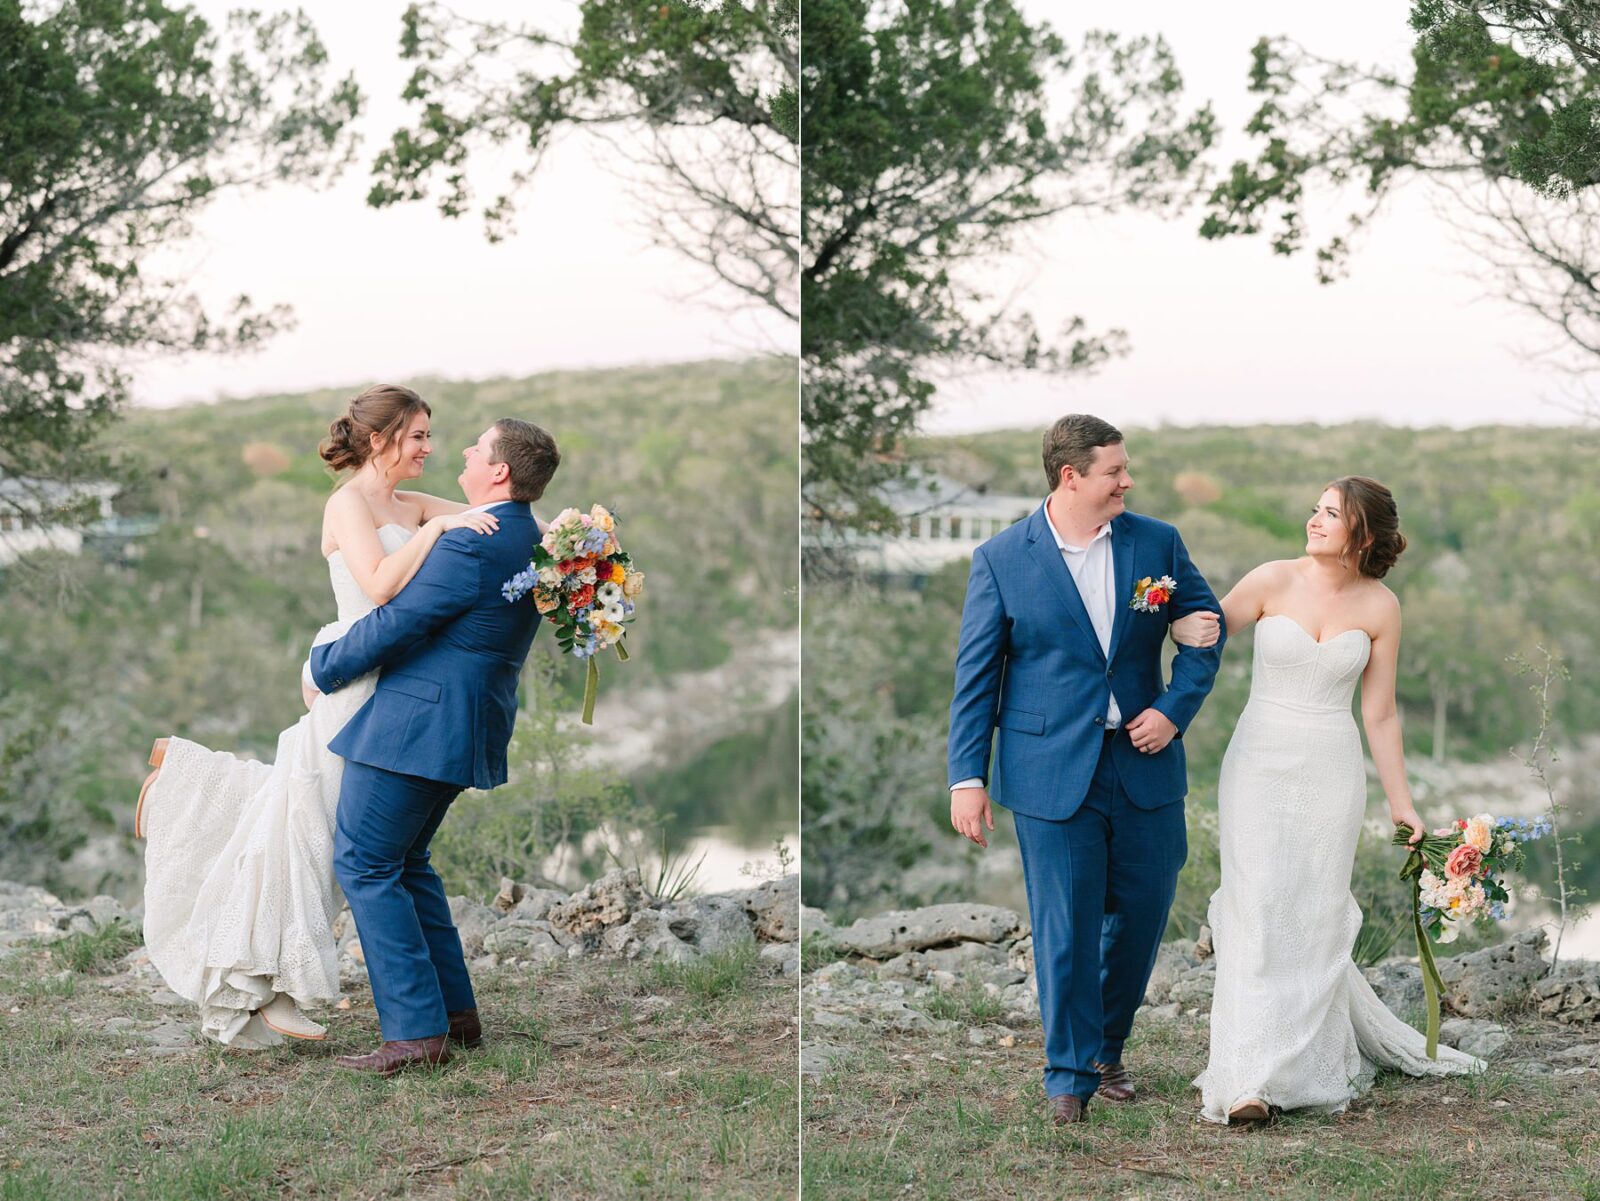 groom lifting bride, wedding at the videre estate venue, wimberley, photos by Tara Lyons Photography, Perry's Petal, planning by sweet magnolia events